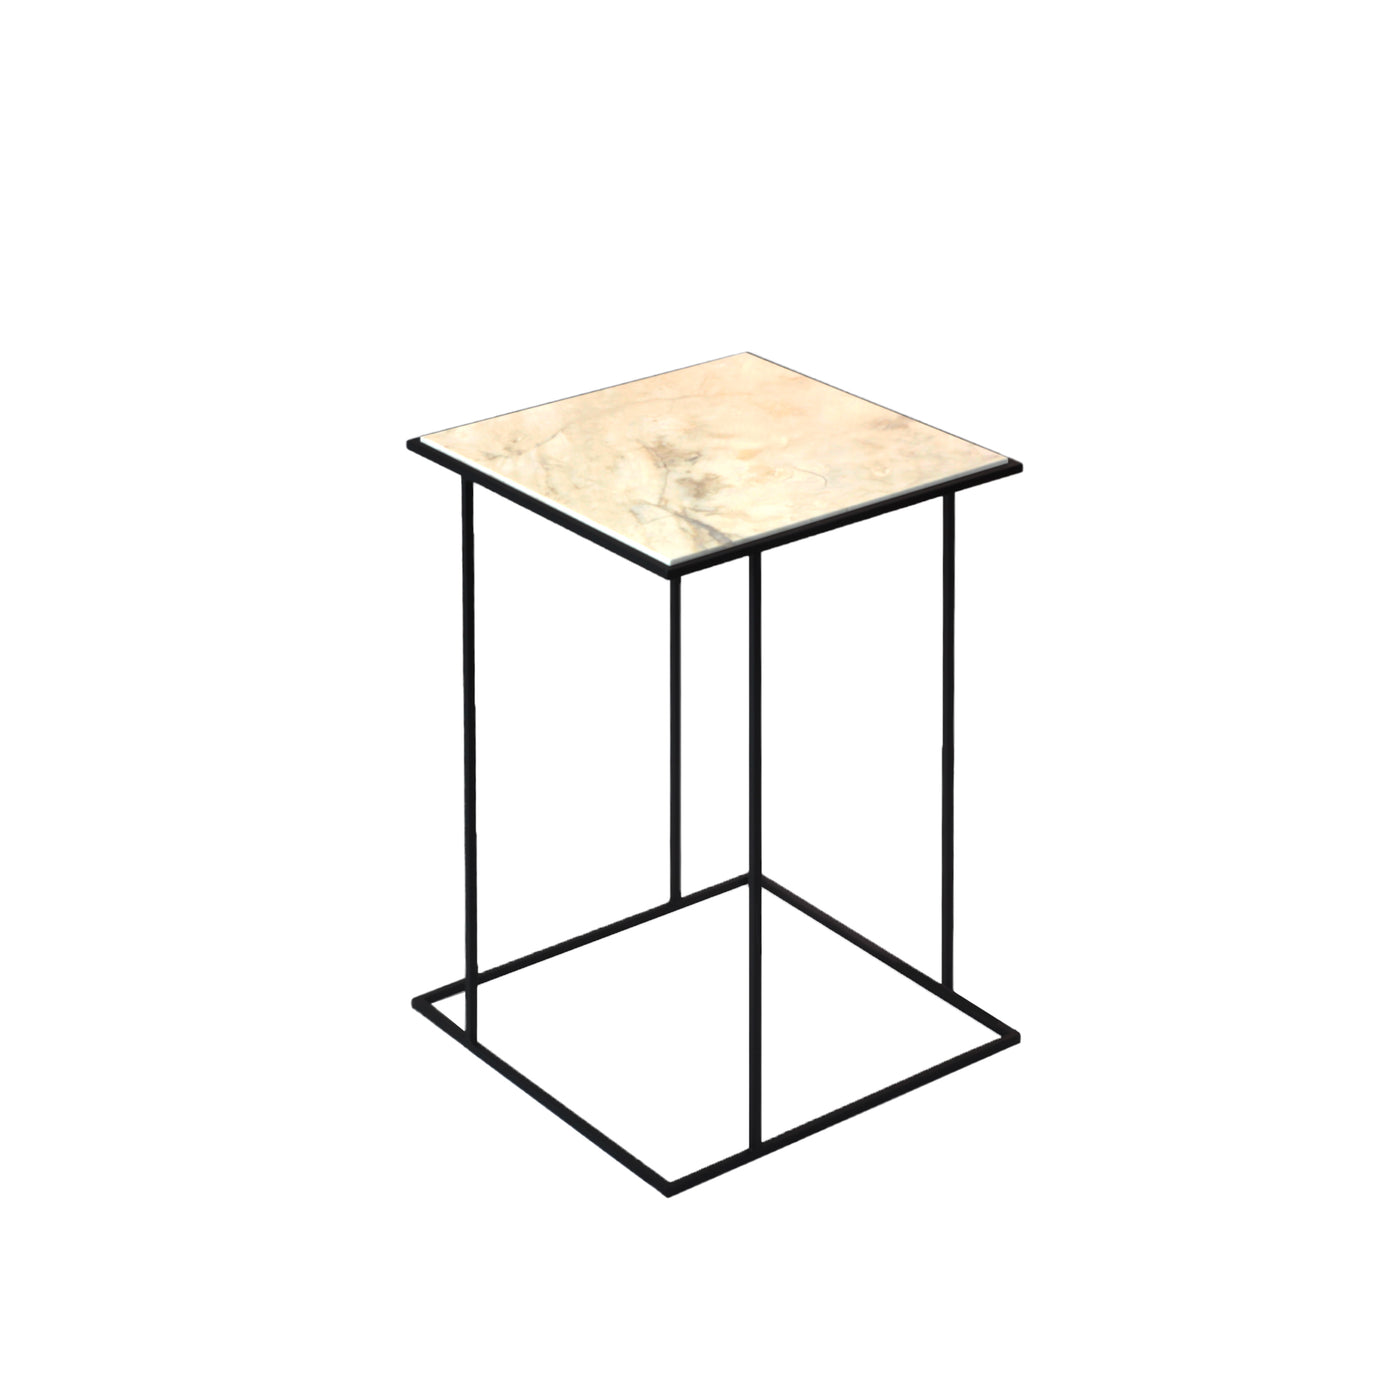 Stone Side Table FRAME by Nicola Di Froscia for DFdesignLab 01